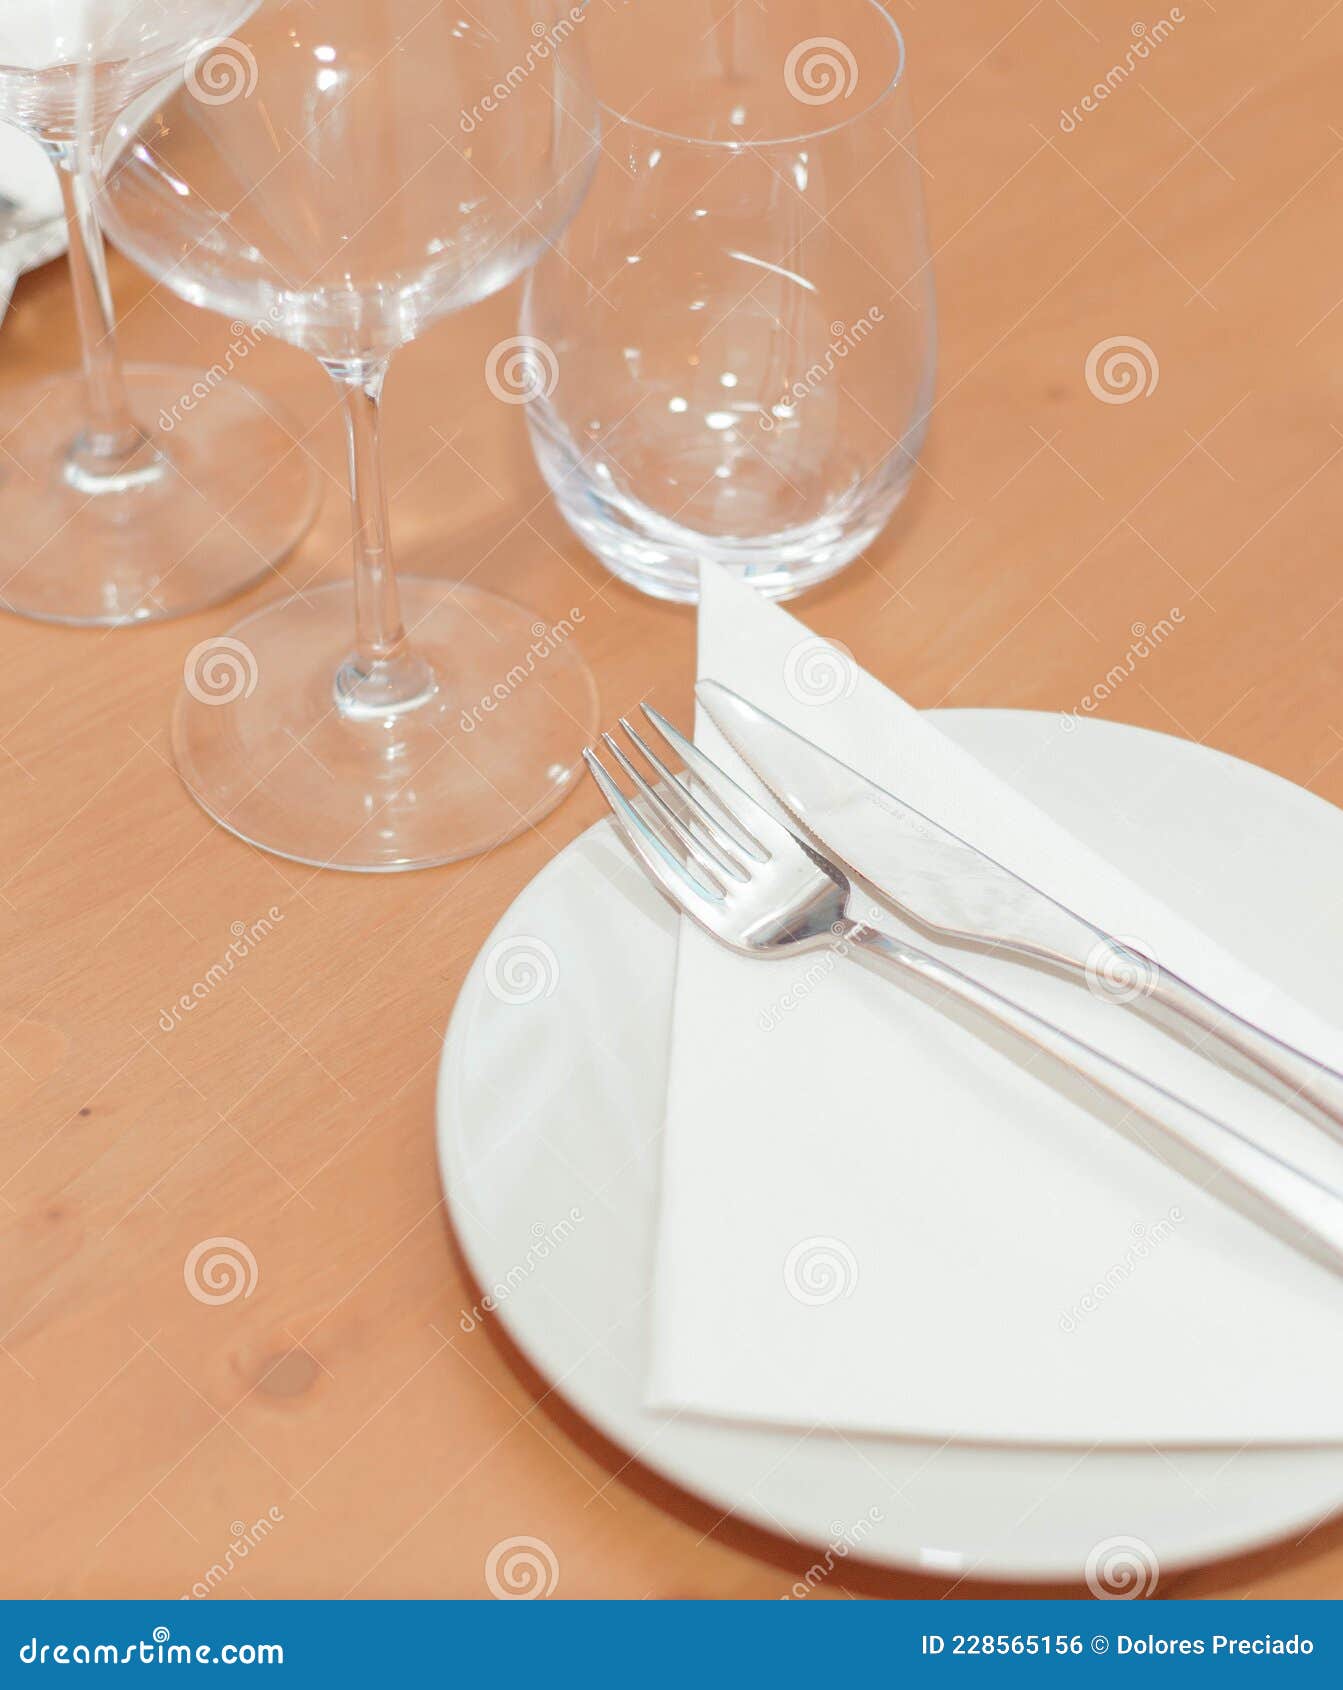 plate, cutlery and glasses set for an elegant dinner